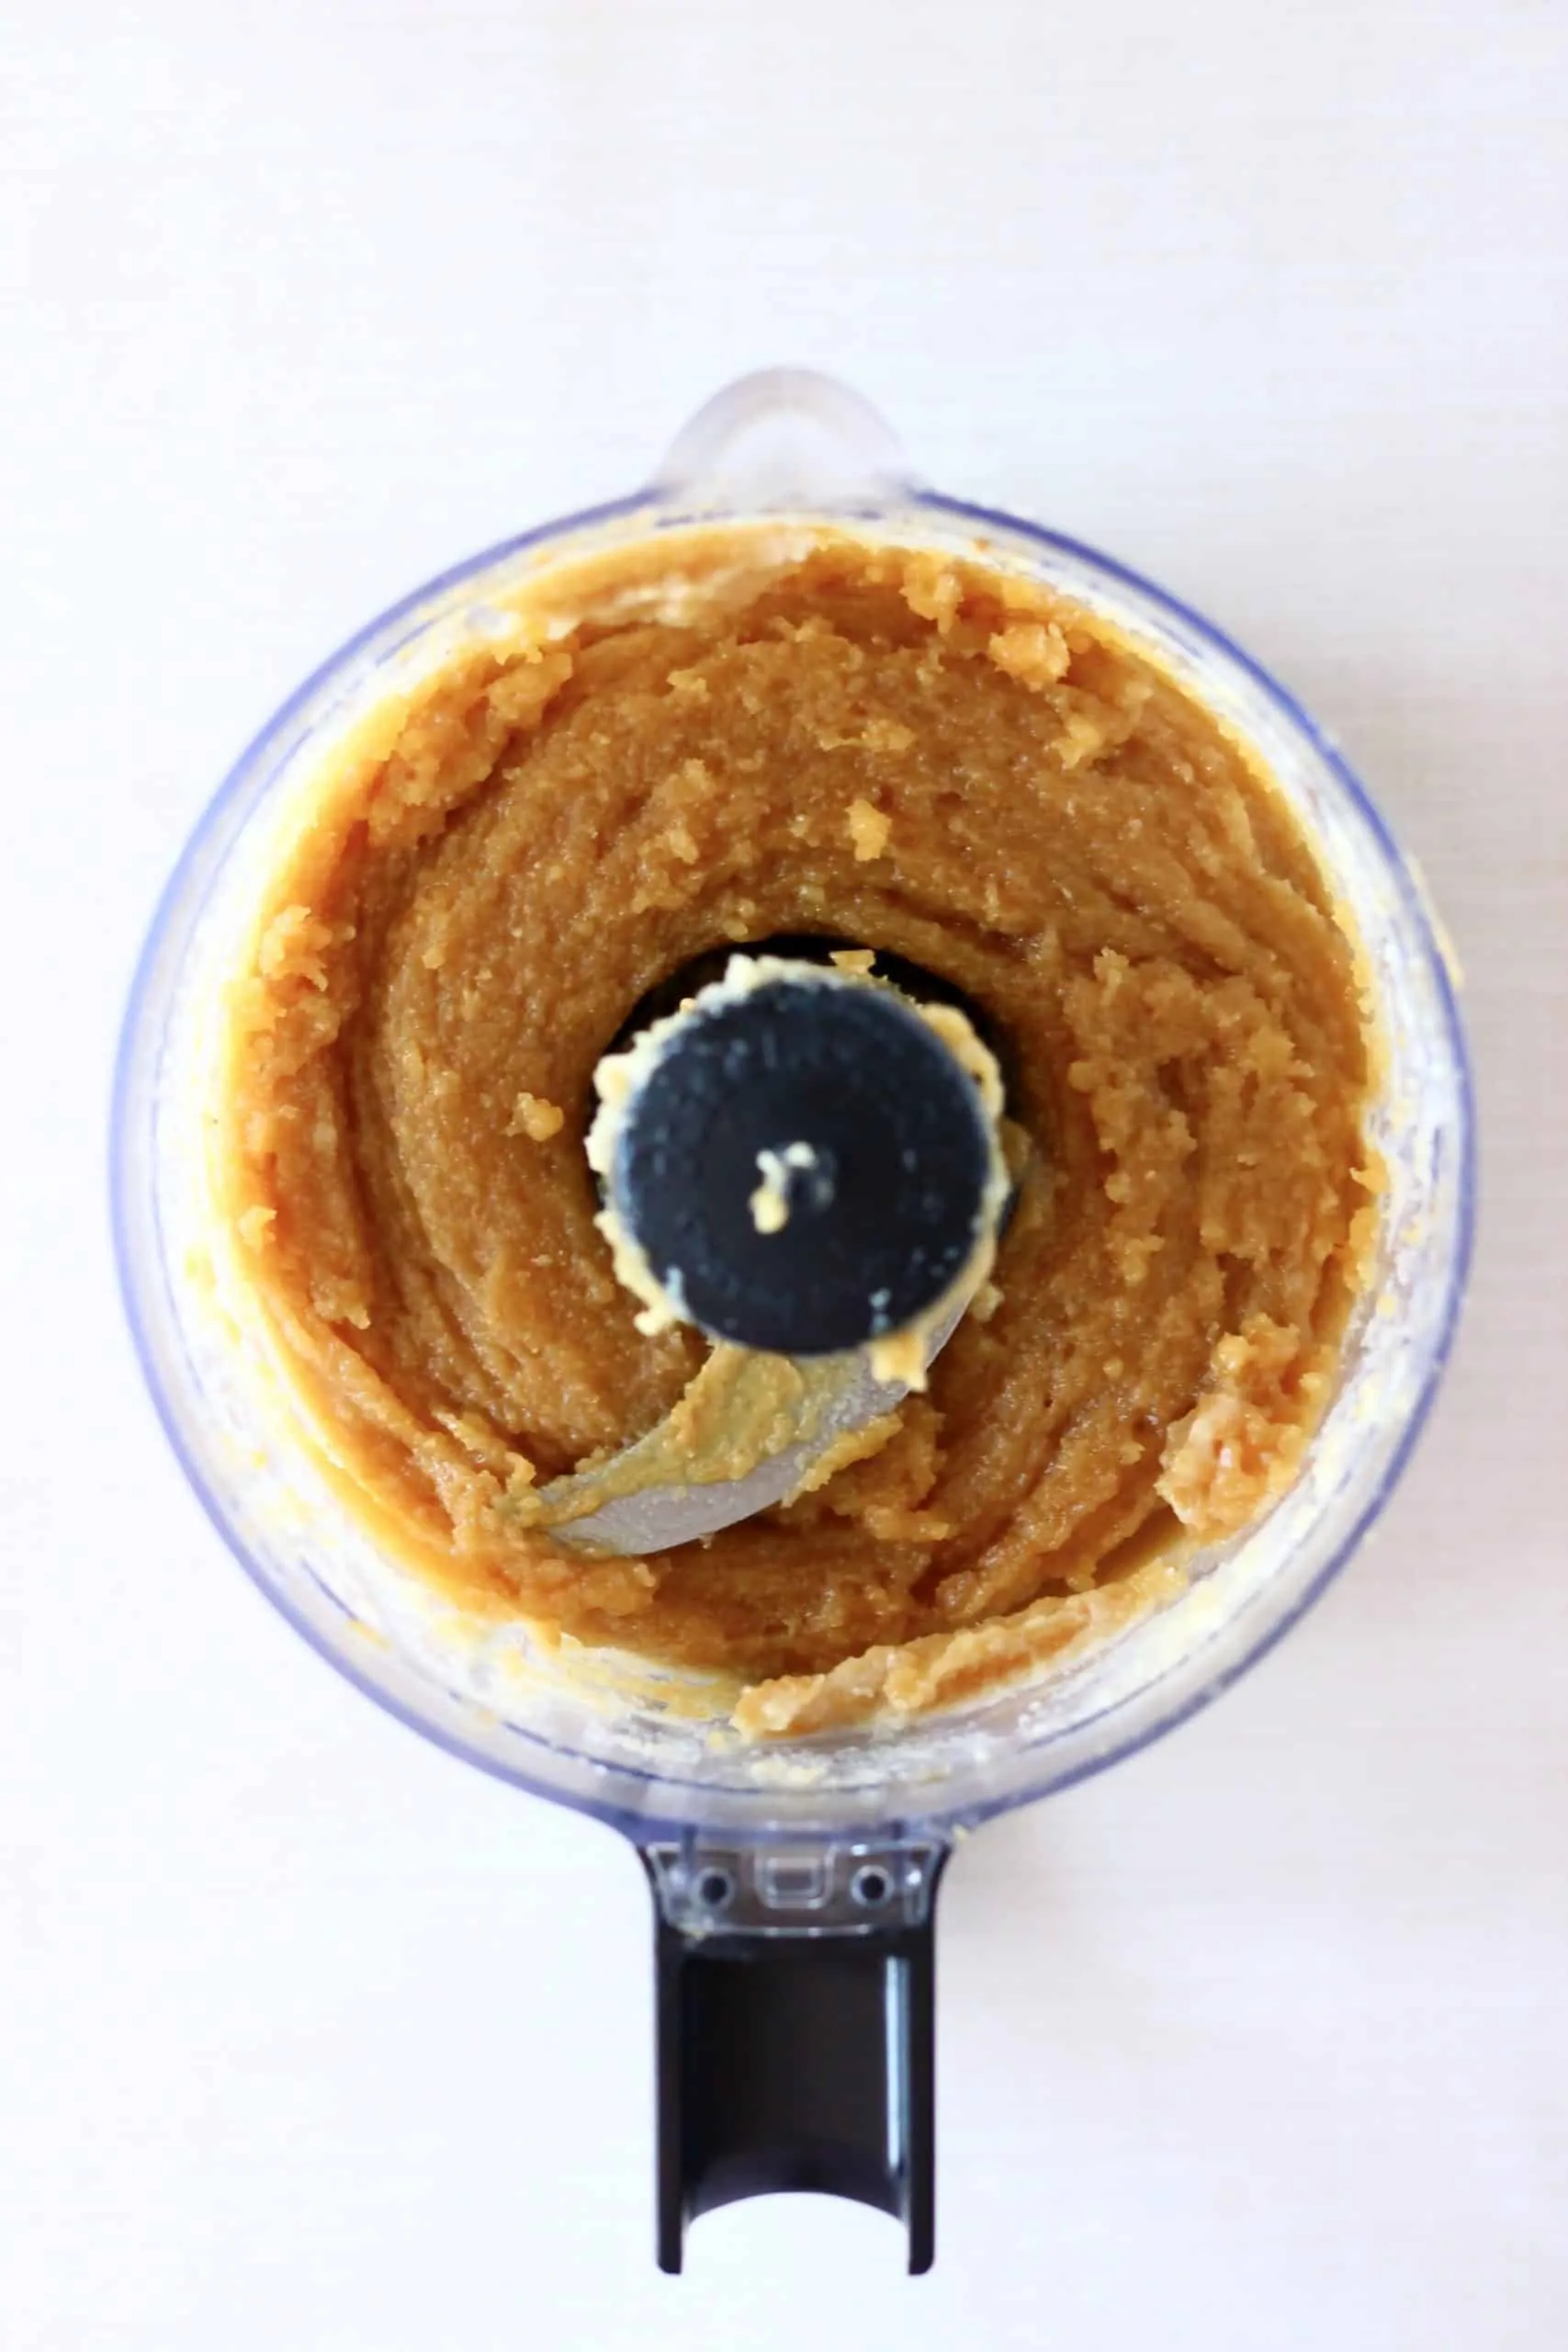 Blended peanut butter ball mixture in a food processor